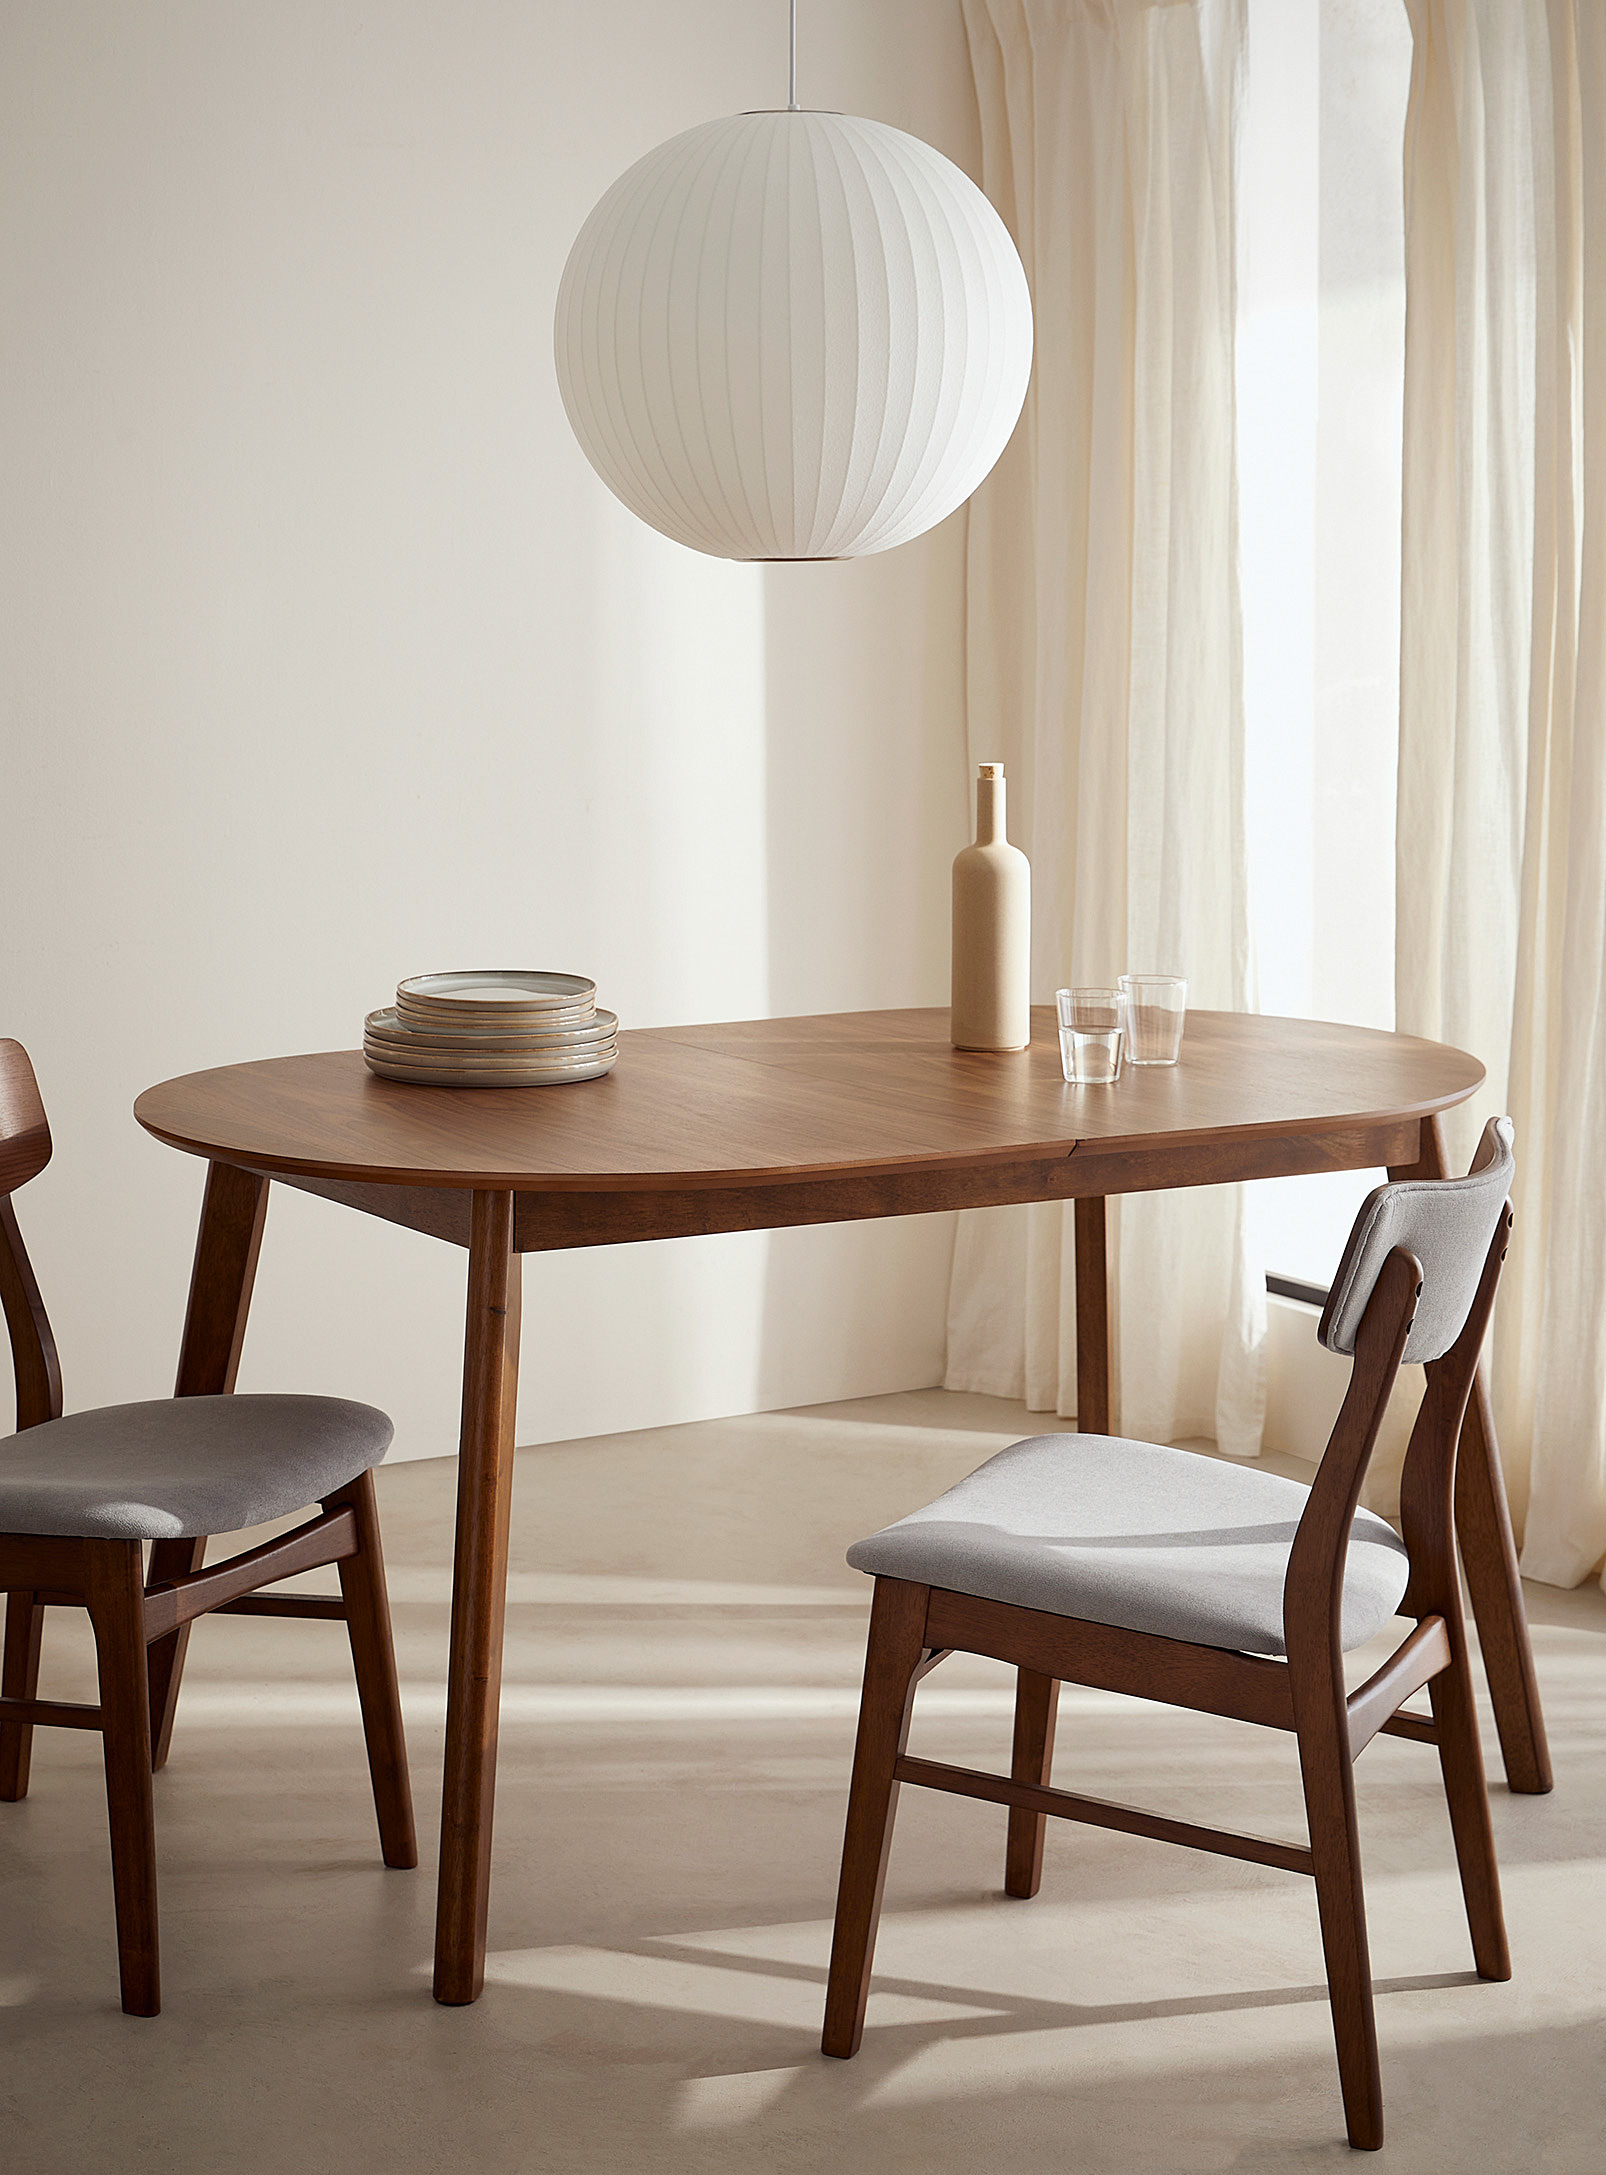 Simons Maison Rounded Wood Table With Extension In Brown